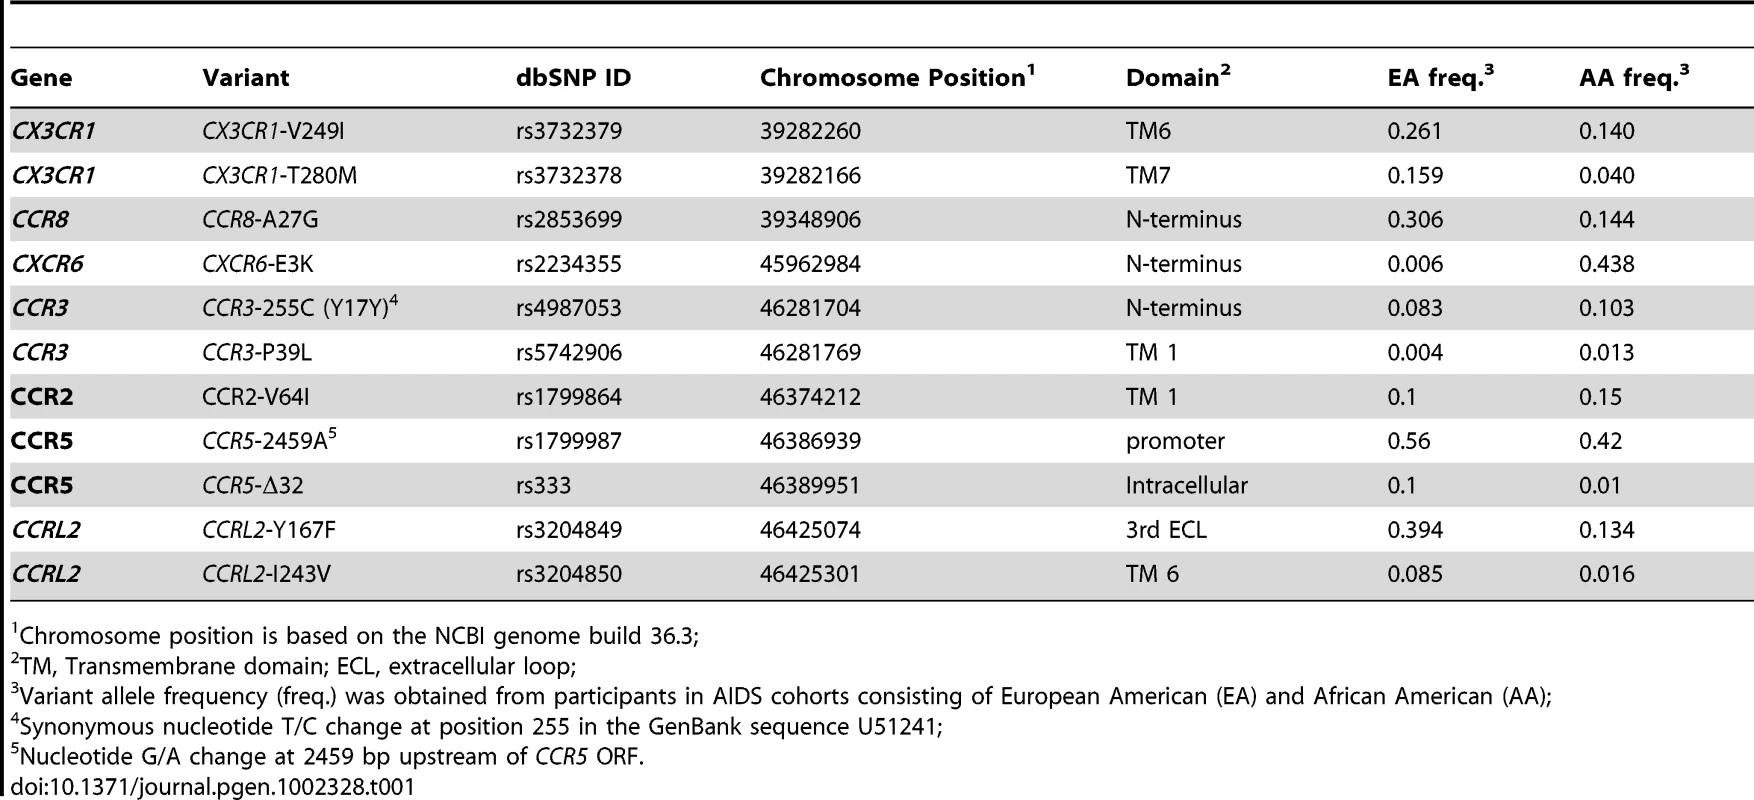 Characteristics and allele frequencies of the chemokine receptor variants.